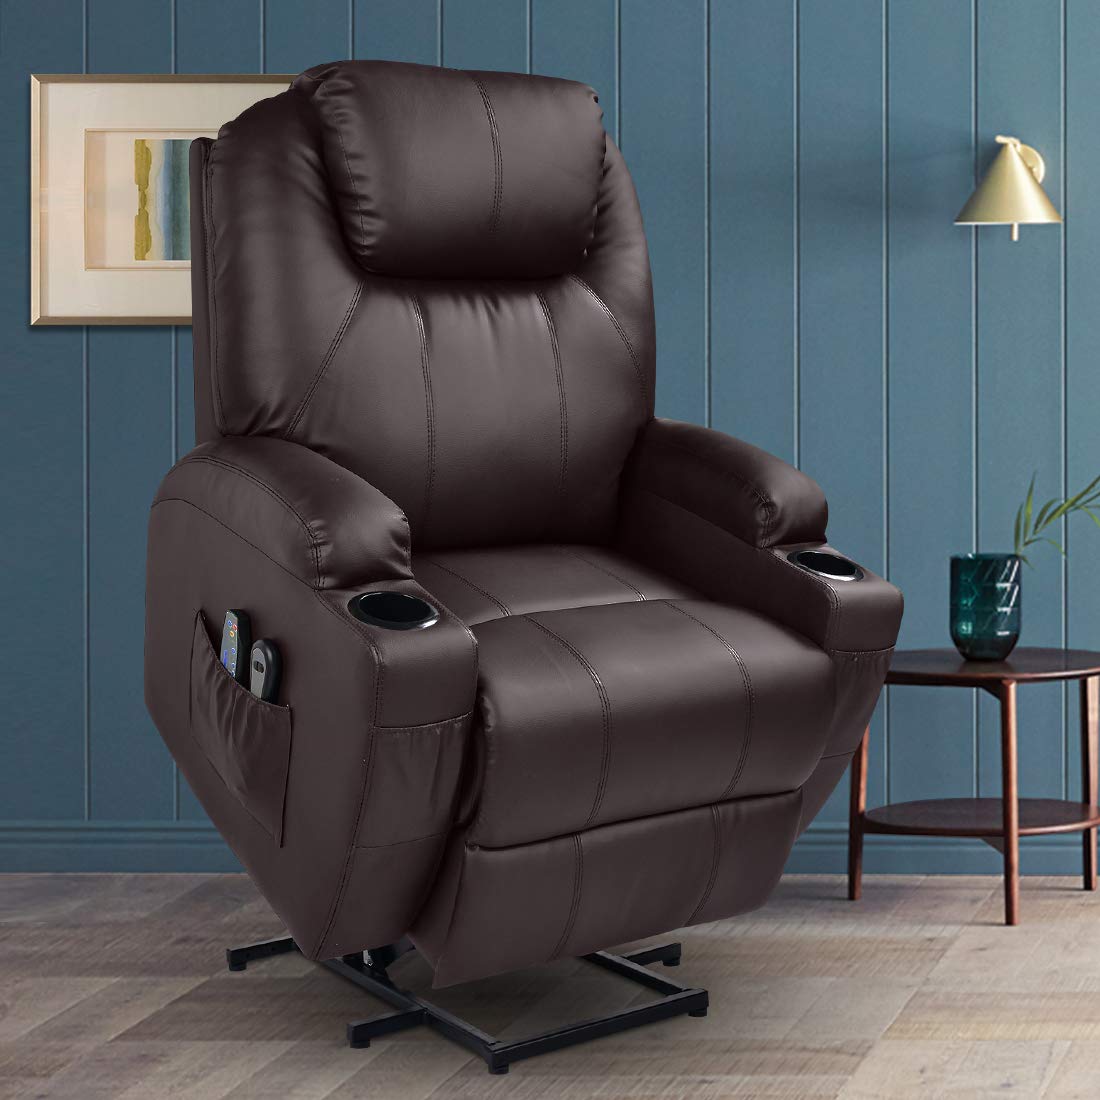 Best Recliners For Seniors And Elderly In 2020 Top Reviews🏅